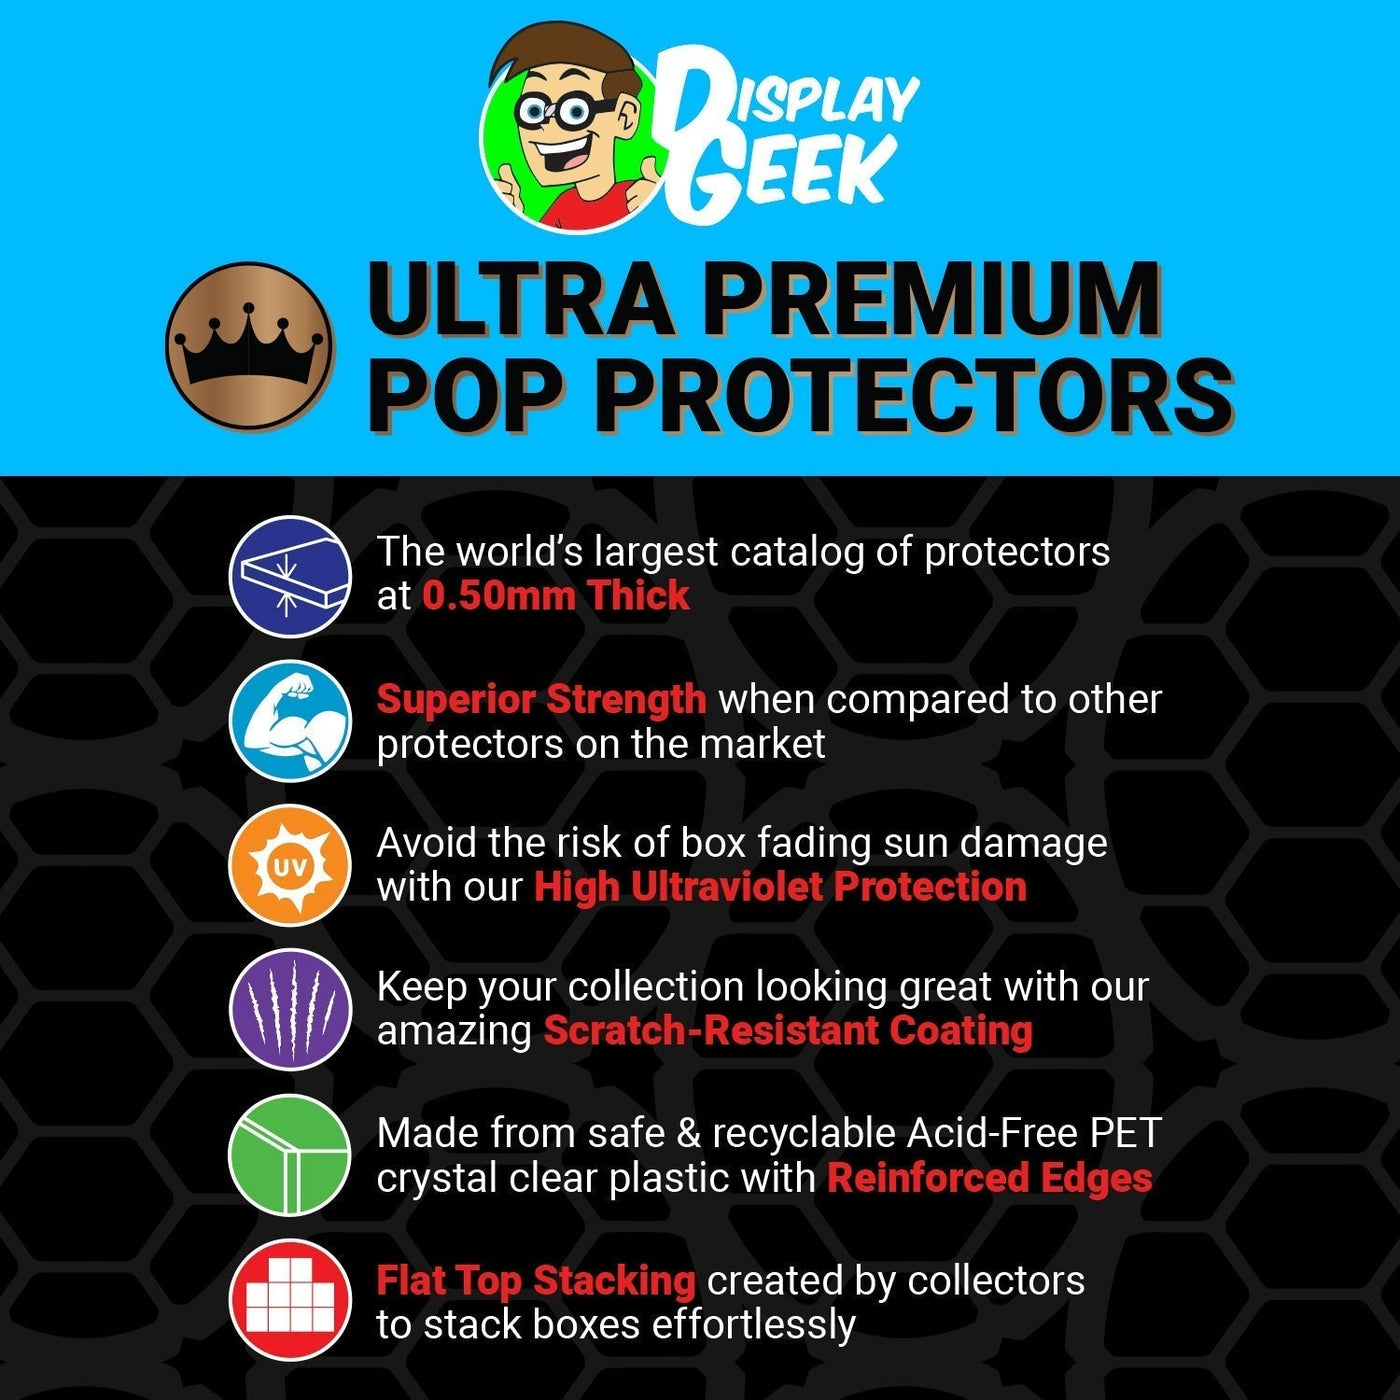 Pop Protector for Lydia Deetz FunkO's Cereal Box on The Protector Guide App by Display Geek